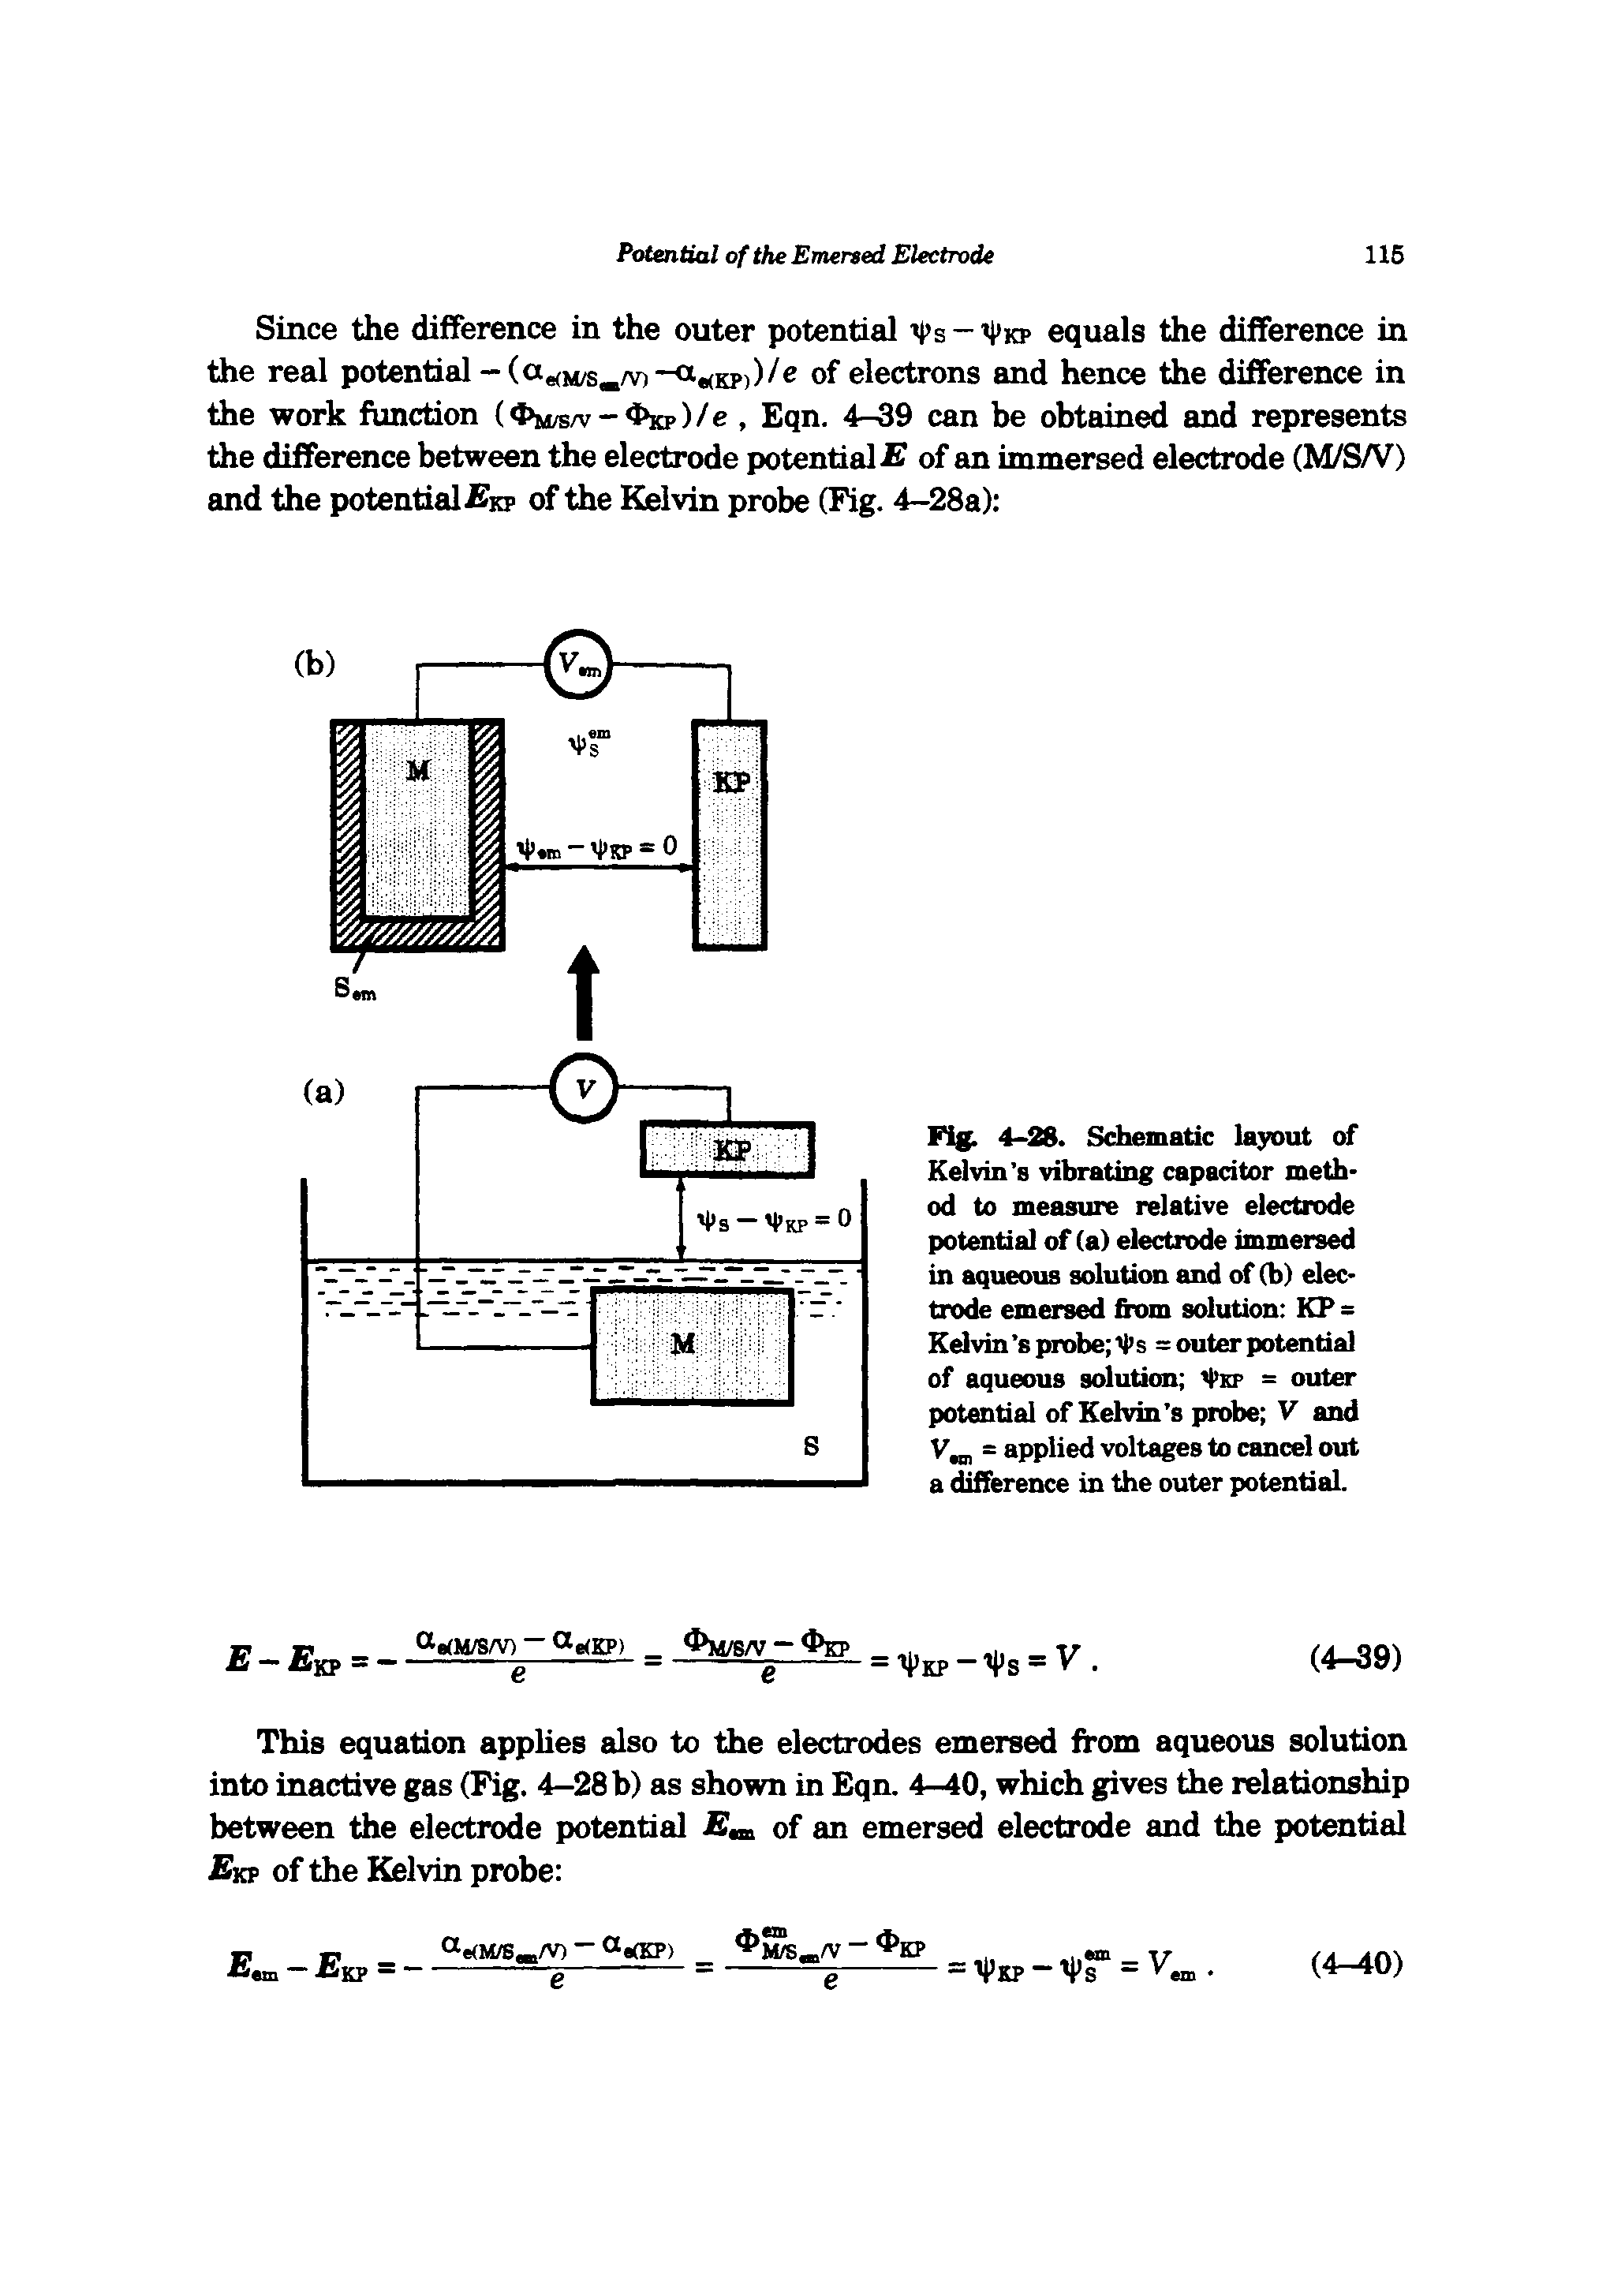 Fig. 4-28. Schematic layout of Kelvin s vibrating capacitor method to measure relative electrode potential of (a) electrode immersed in aqueous solution and of (b) electrode emersed from solution KP = Kelvin s probe 4 s = outer potential of aqueous solution 4>kp = outer potential of Kelvin s probe V and = applied voltages to cancel out a difference in the outer potential.